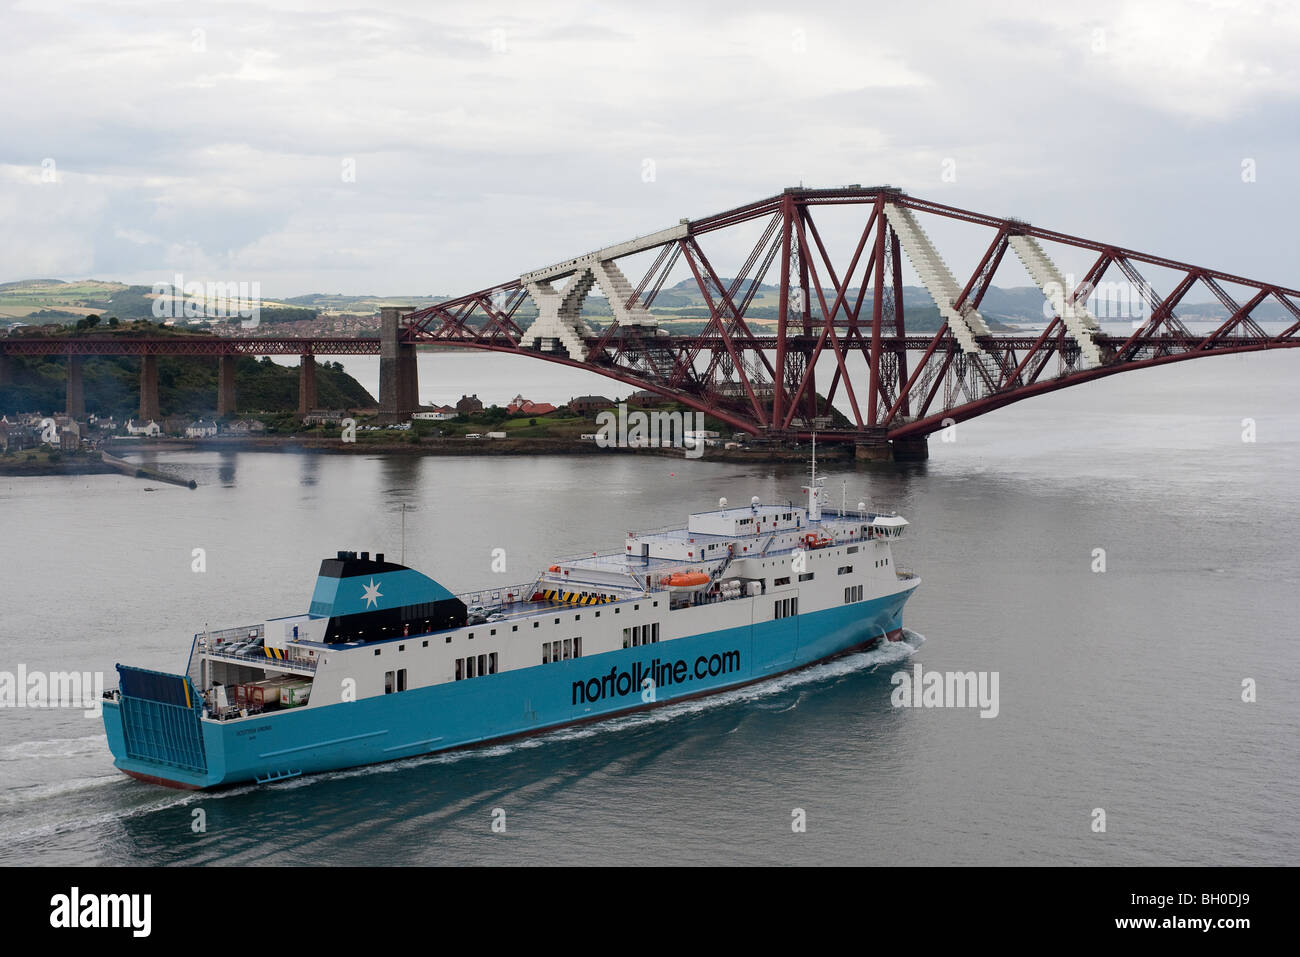 A Norfolkline vessel passing under the Forth Railway Bridge at Queensferry, Scotland Stock Photo